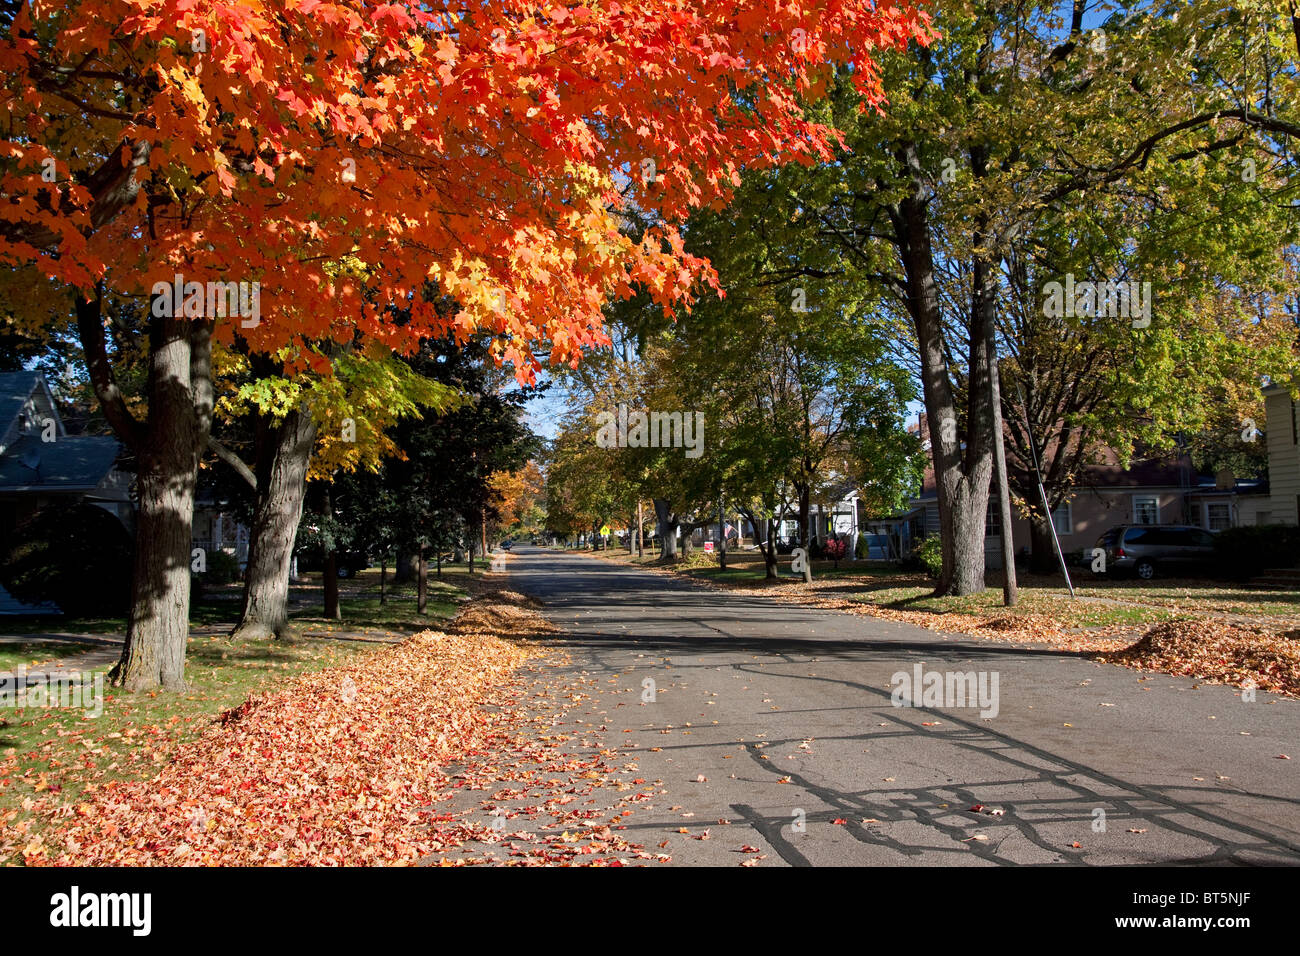 Autumn colors Sugar Maple trees Acer saccharum  along street of Owosso MI USA, by Dembinsky Photo Assoc Stock Photo